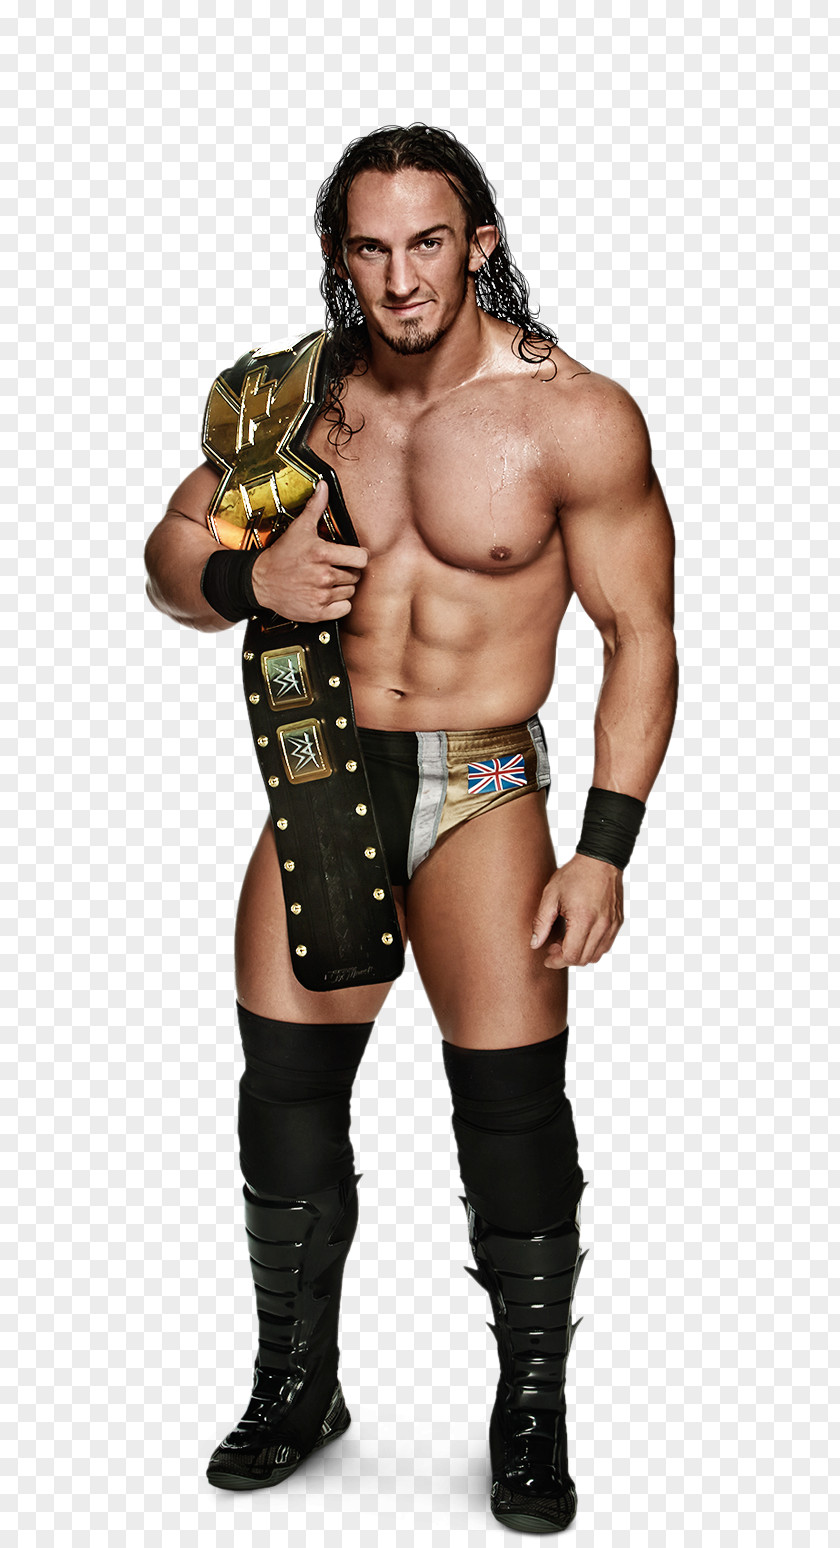 Neville NXT TakeOver: R Evolution WWE Superstars Championship PNG NXT, Wrestlers clipart PNG